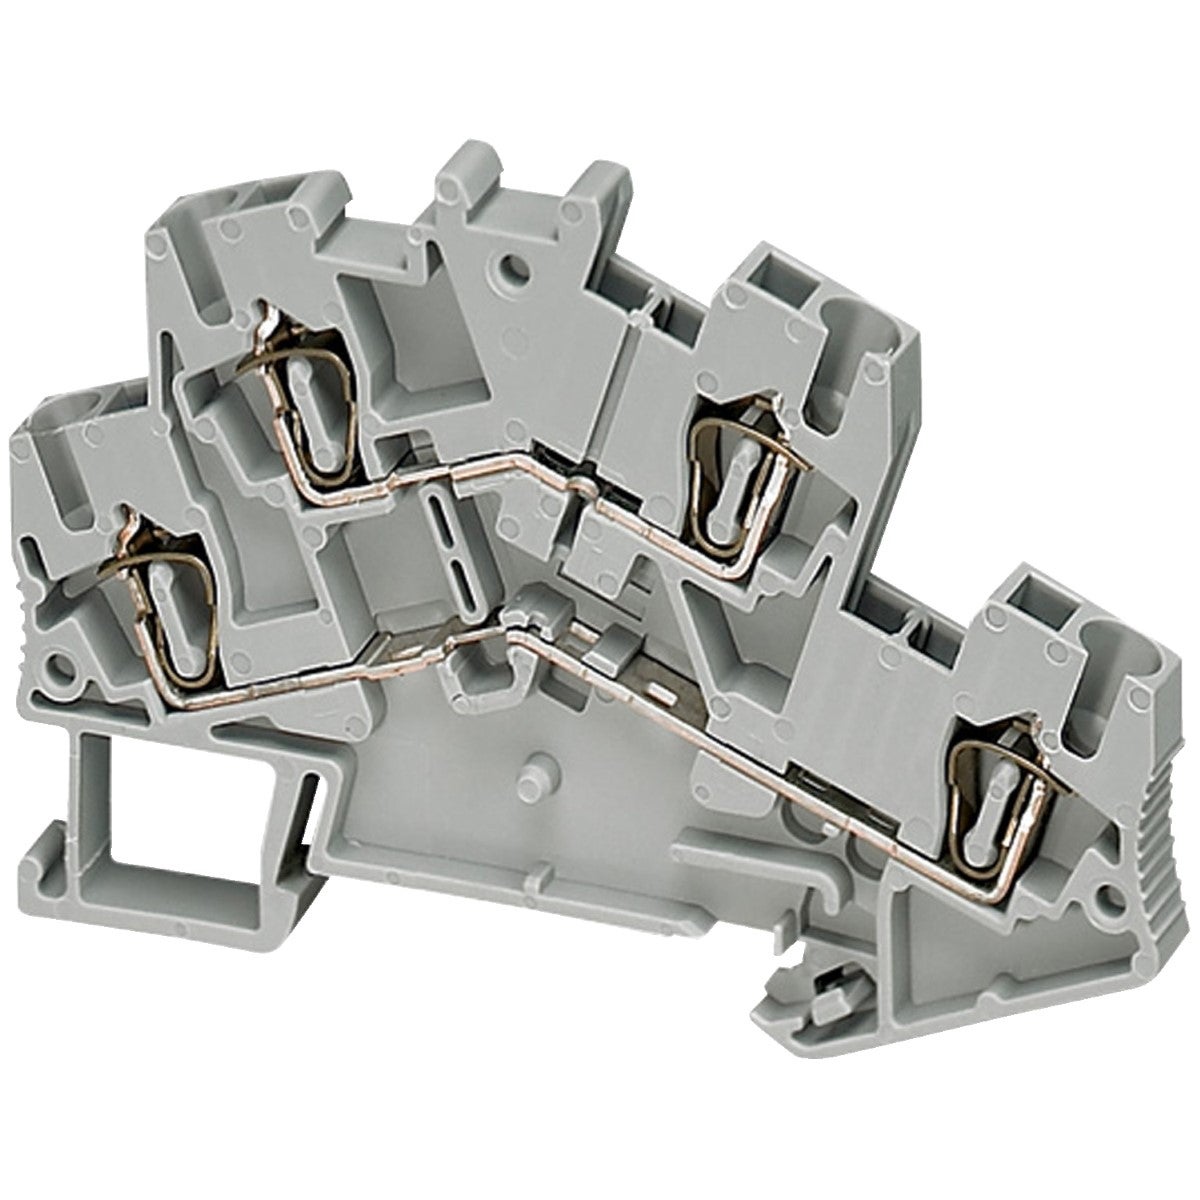 Terminal block, Linergy TR, spring type, feed through, 2 level, 4 points, 2.5mm�, grey, set of 50